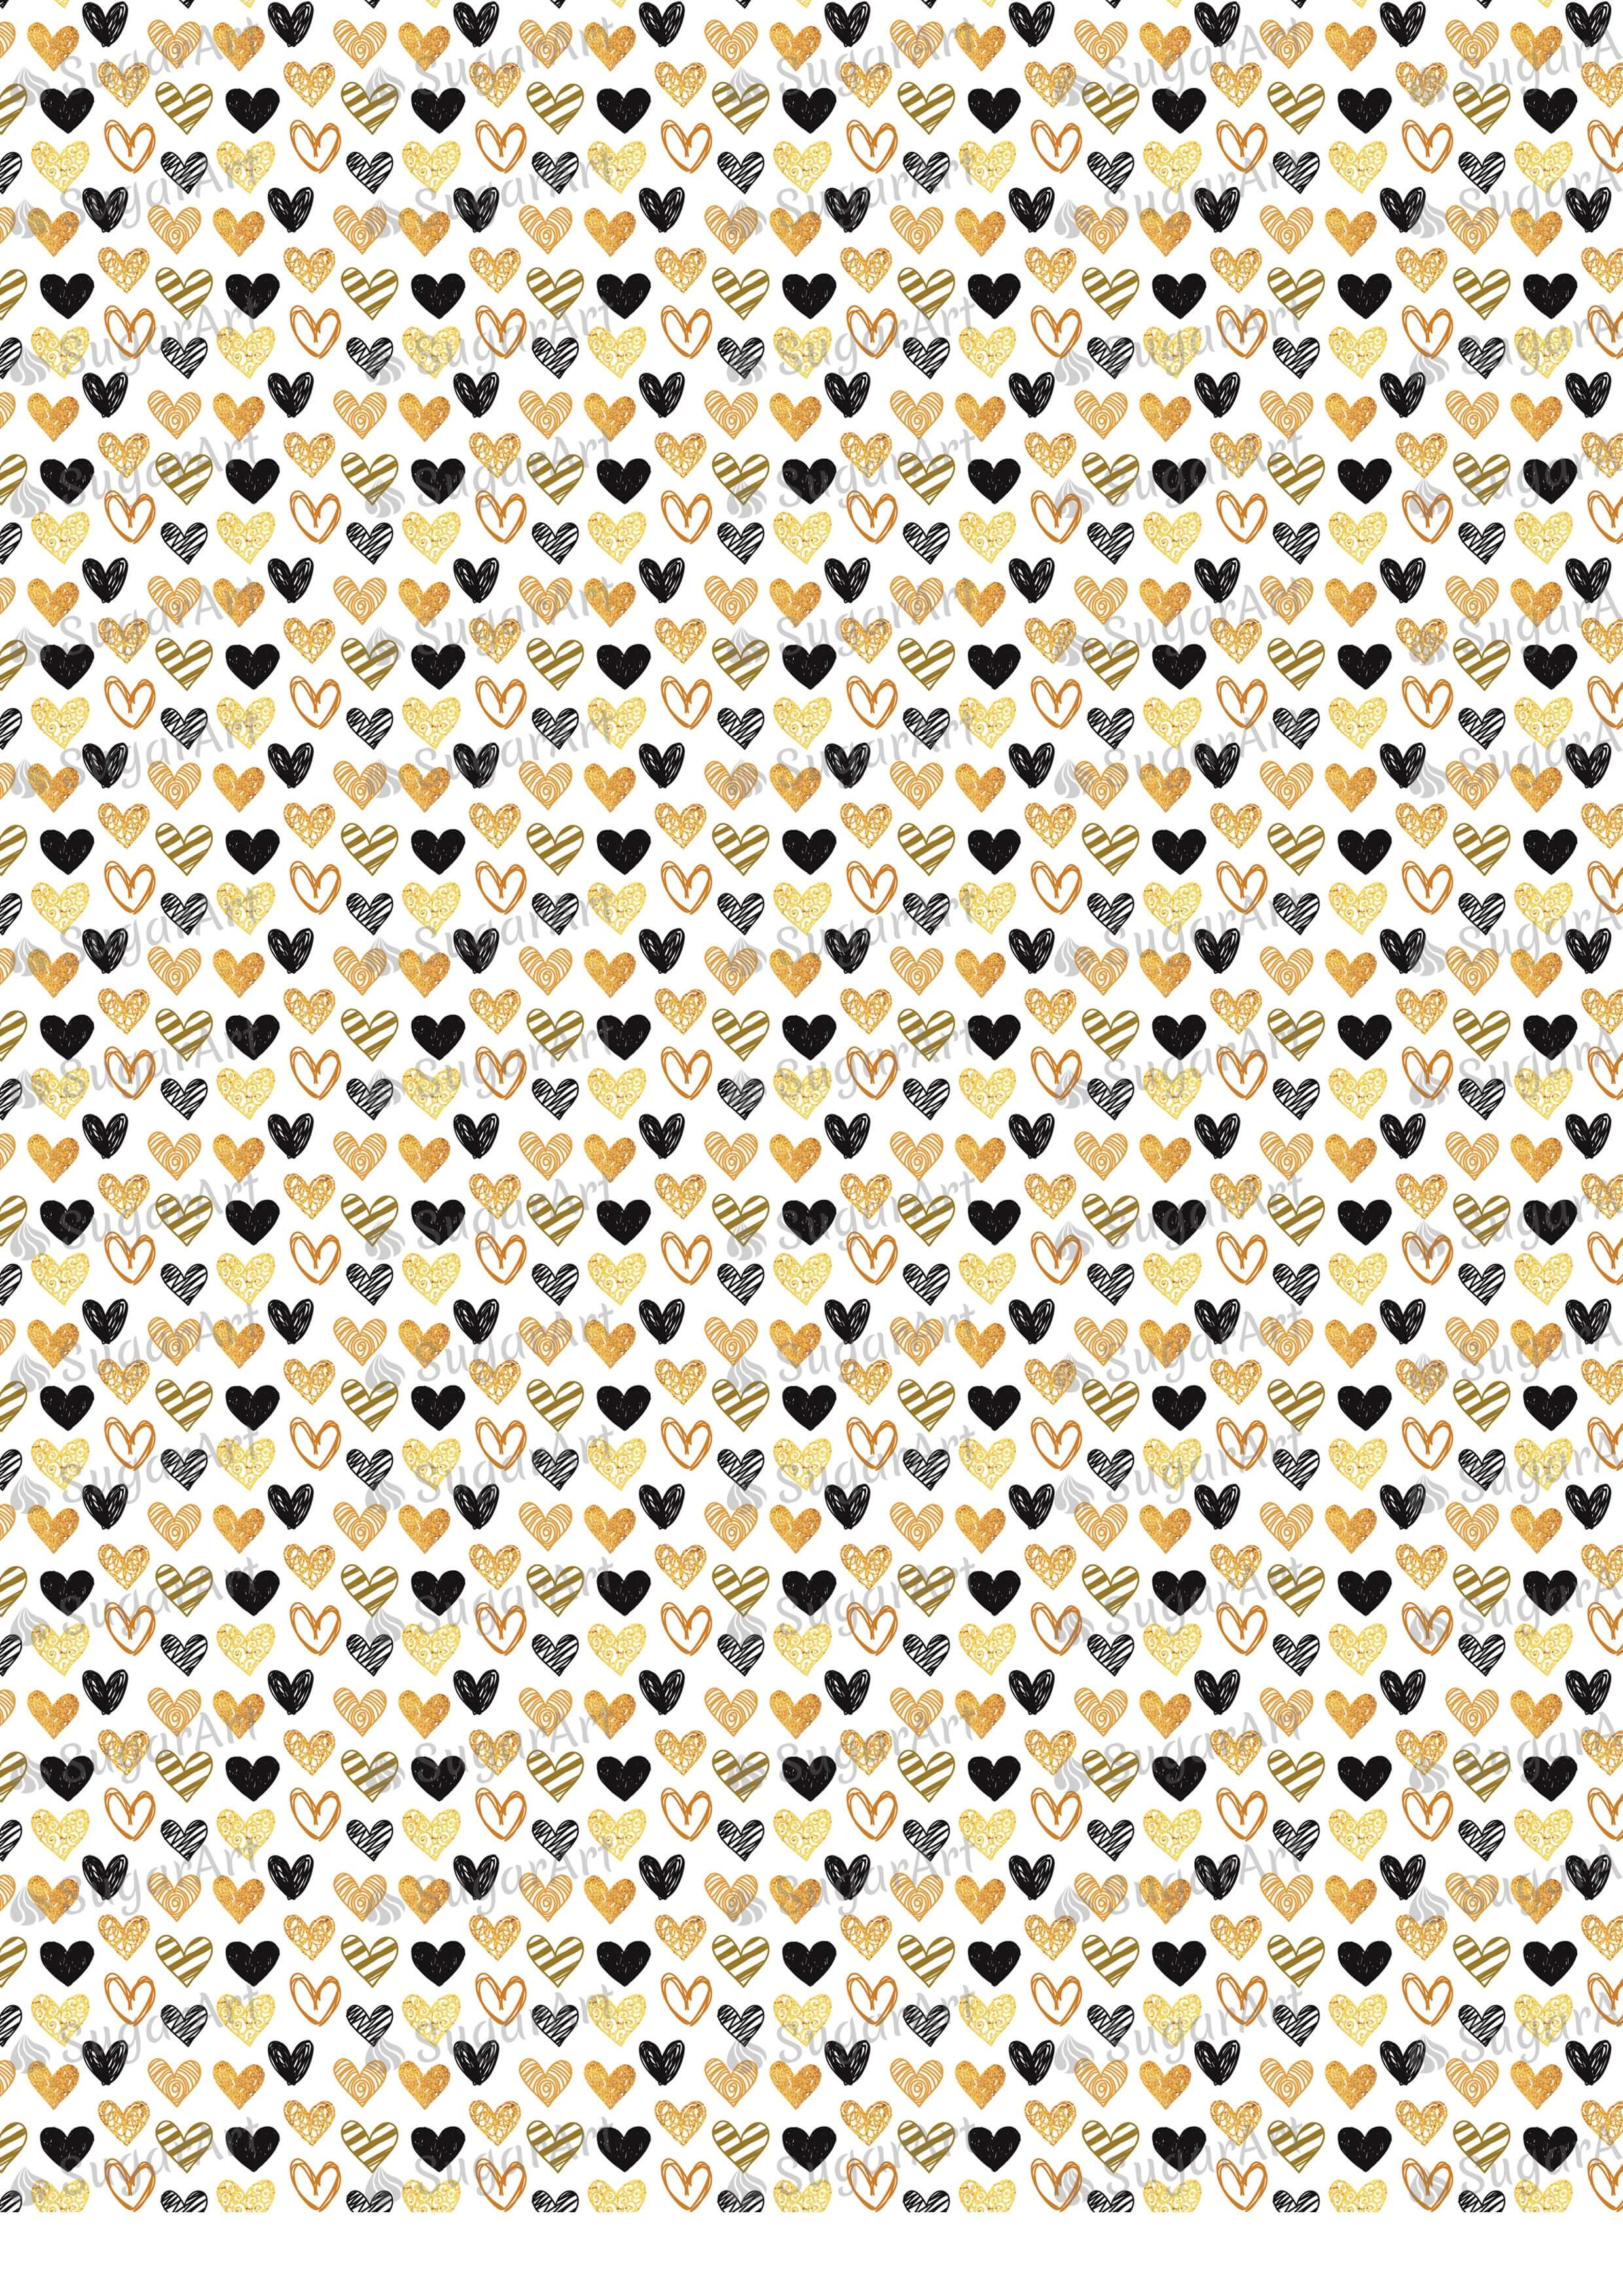 Golden and Black Hearts background - BSA045.